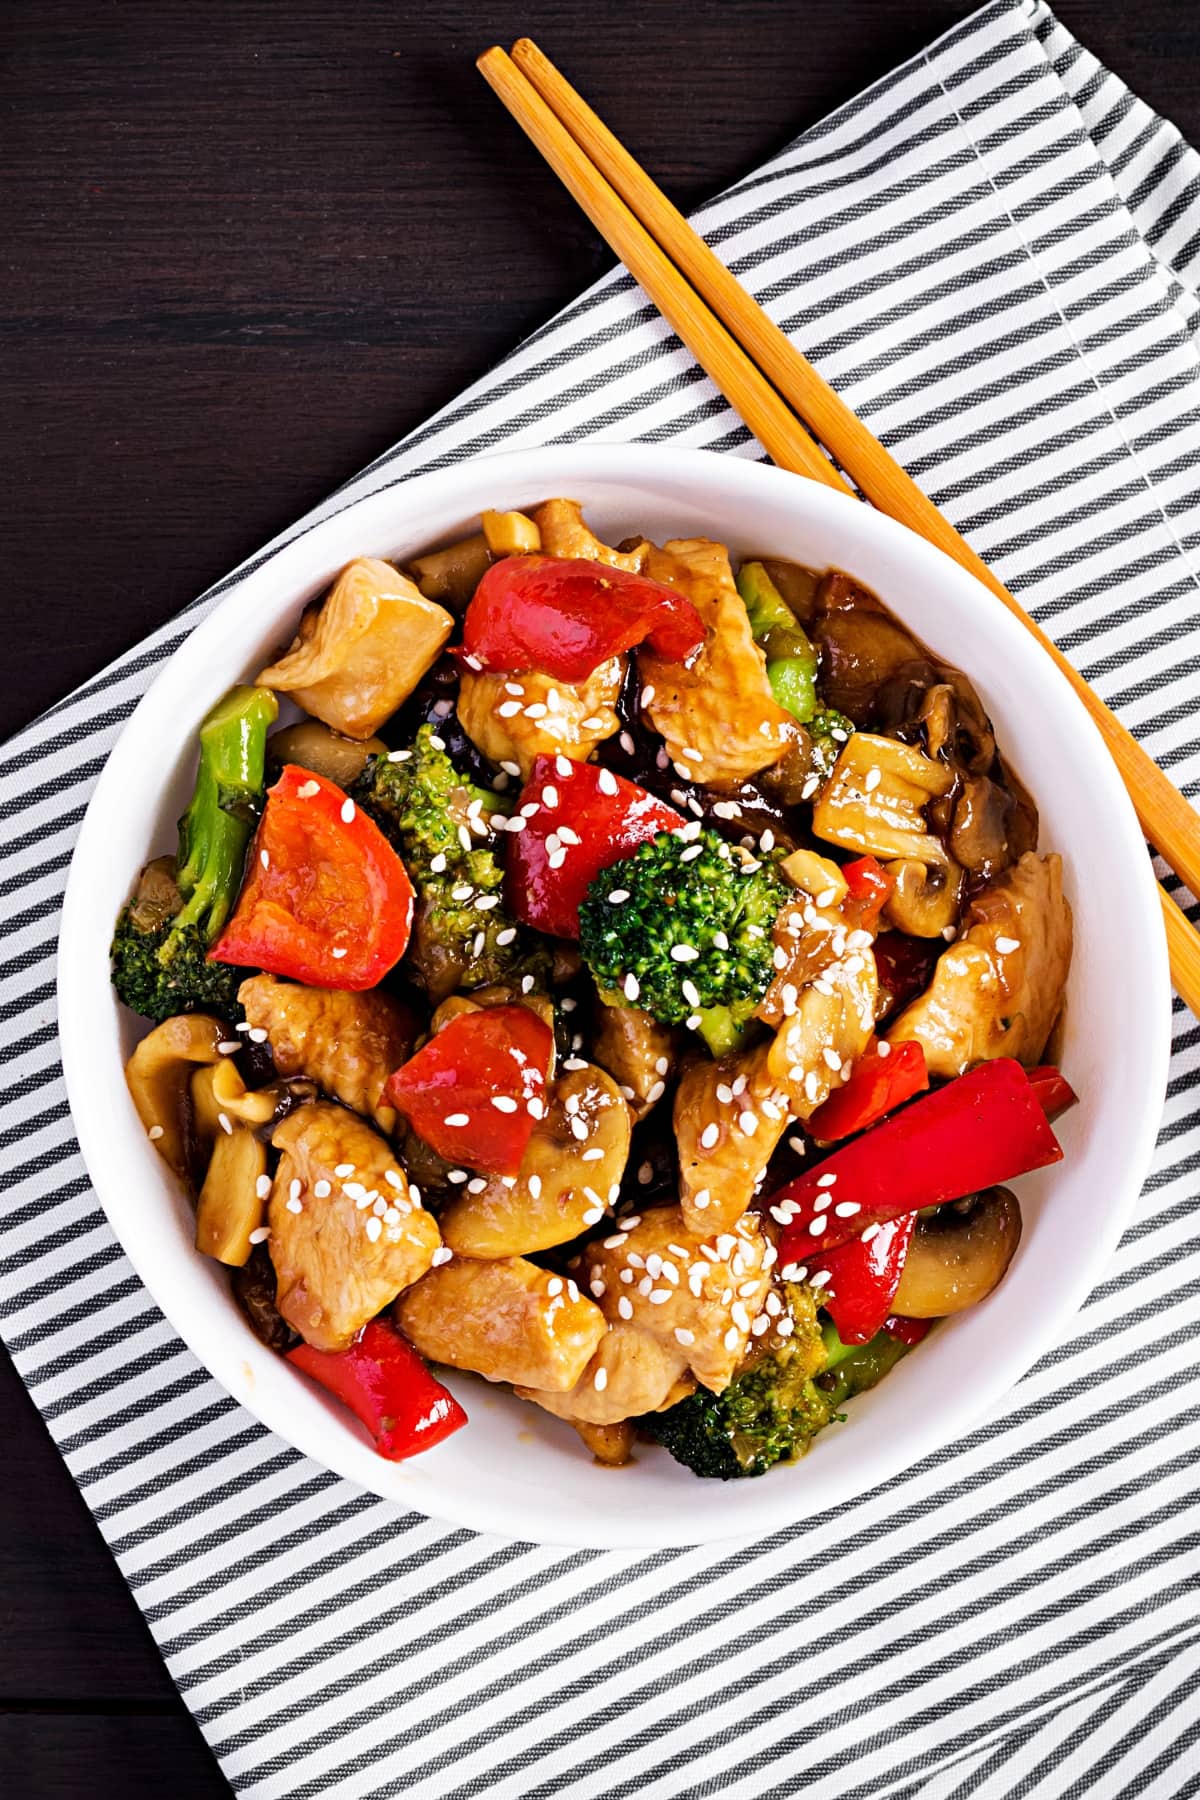 Stir-Fry Chicken with Bell Peppers, Broccoli and Sesame Seeds